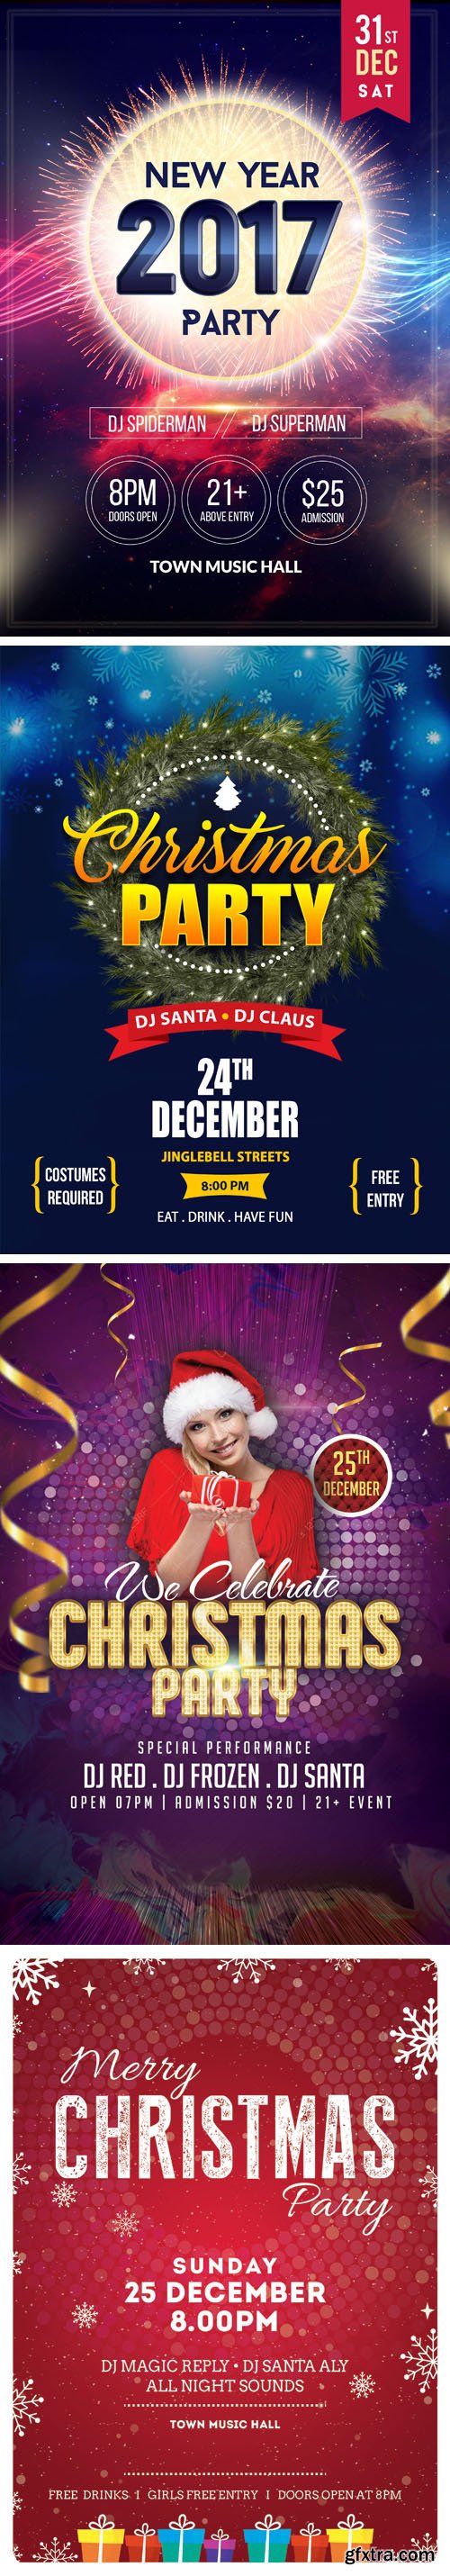 4 Christmas & New Year 2017 Party Flyer Templates PSD